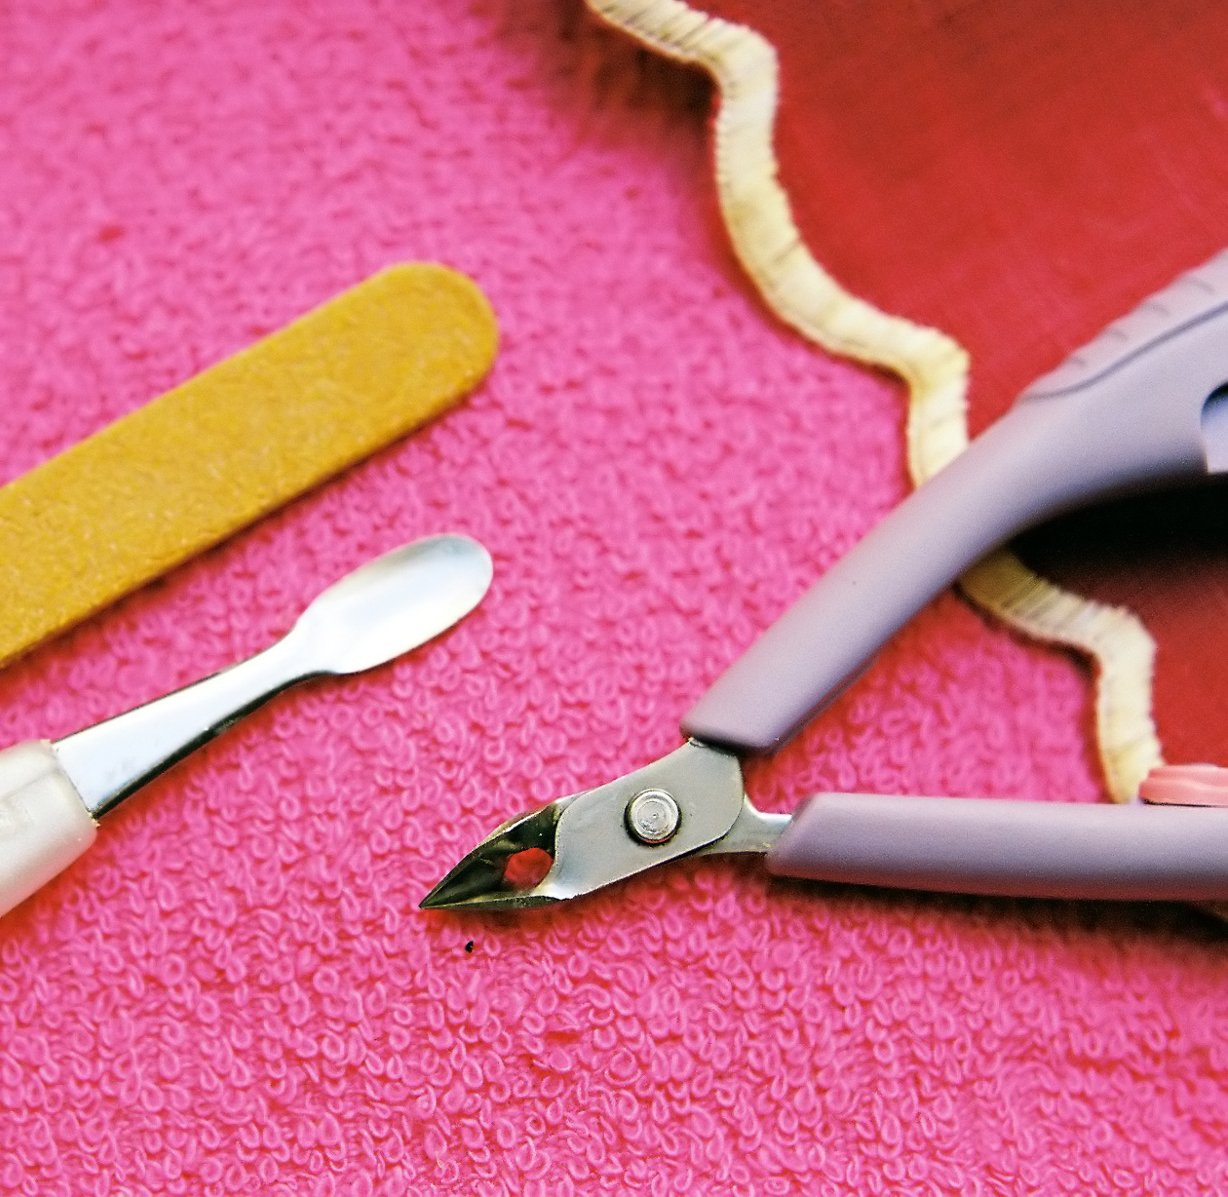 a pair of scissors on the floor next to a piece of fabric